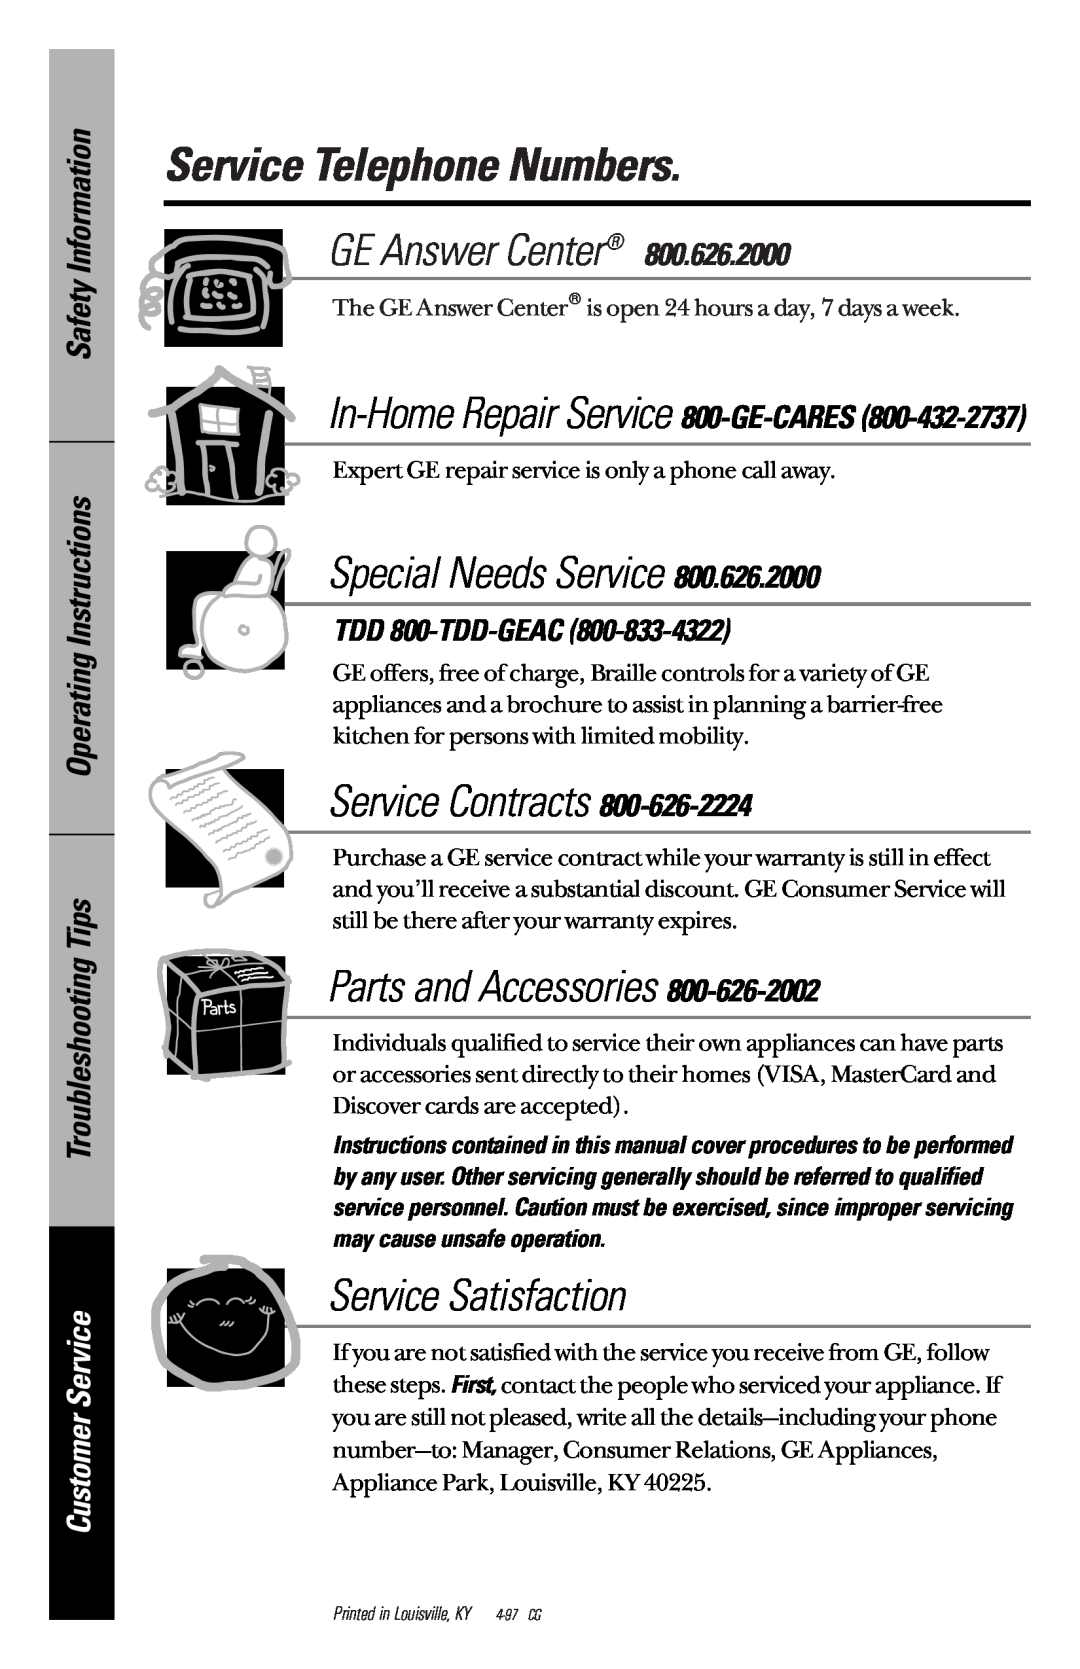 GE PNSF39Z01 Service Telephone Numbers, In-Home Repair Service 800-GE-CARES, TDD 800-TDD-GEAC, GE Answer Center 